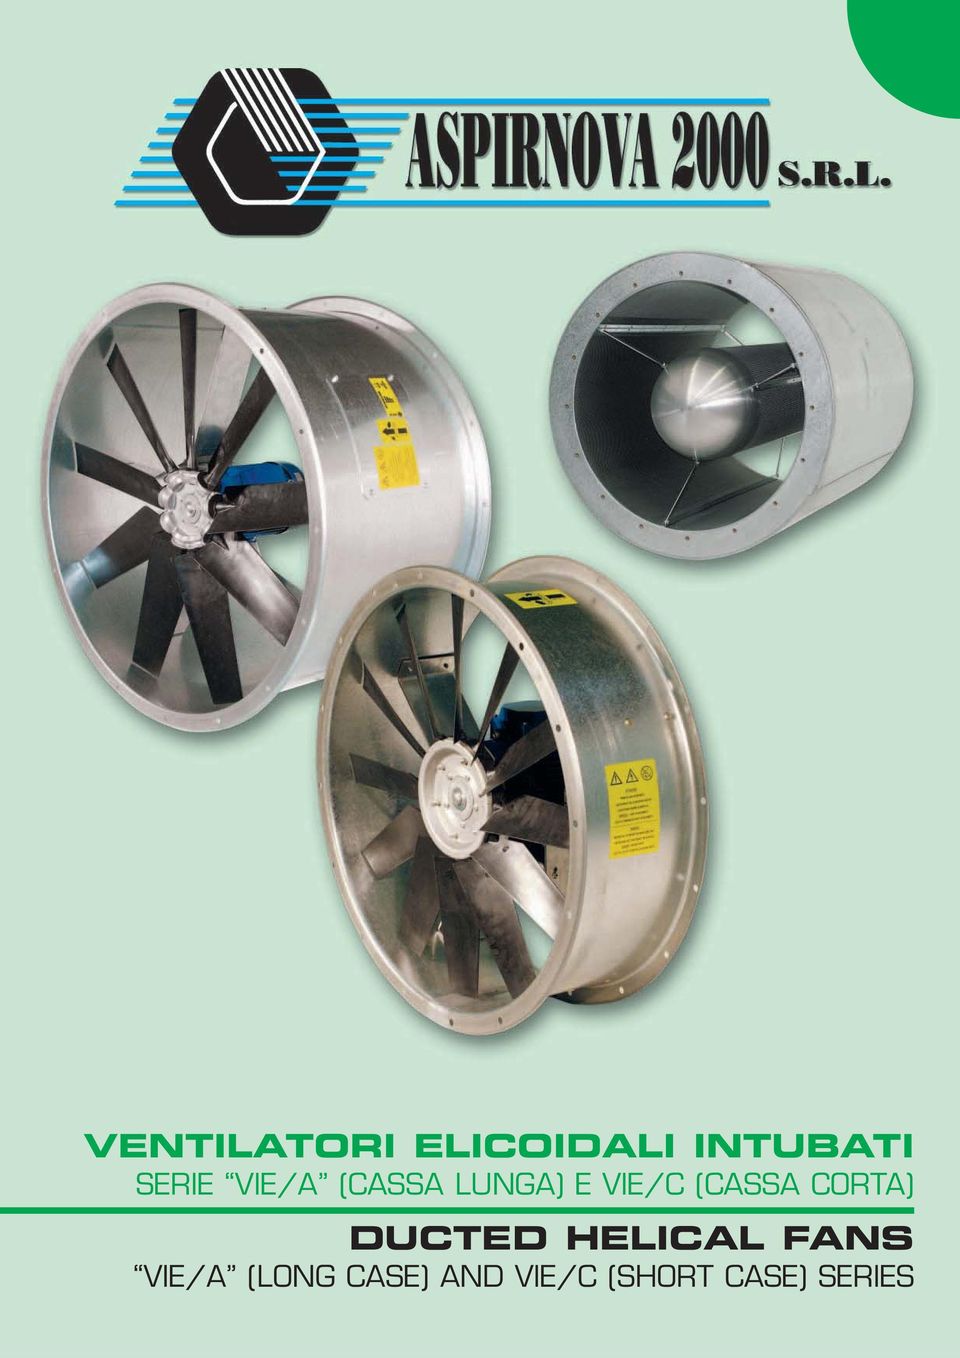 (CASSA CORTA) DUCTED HELICAL FANS